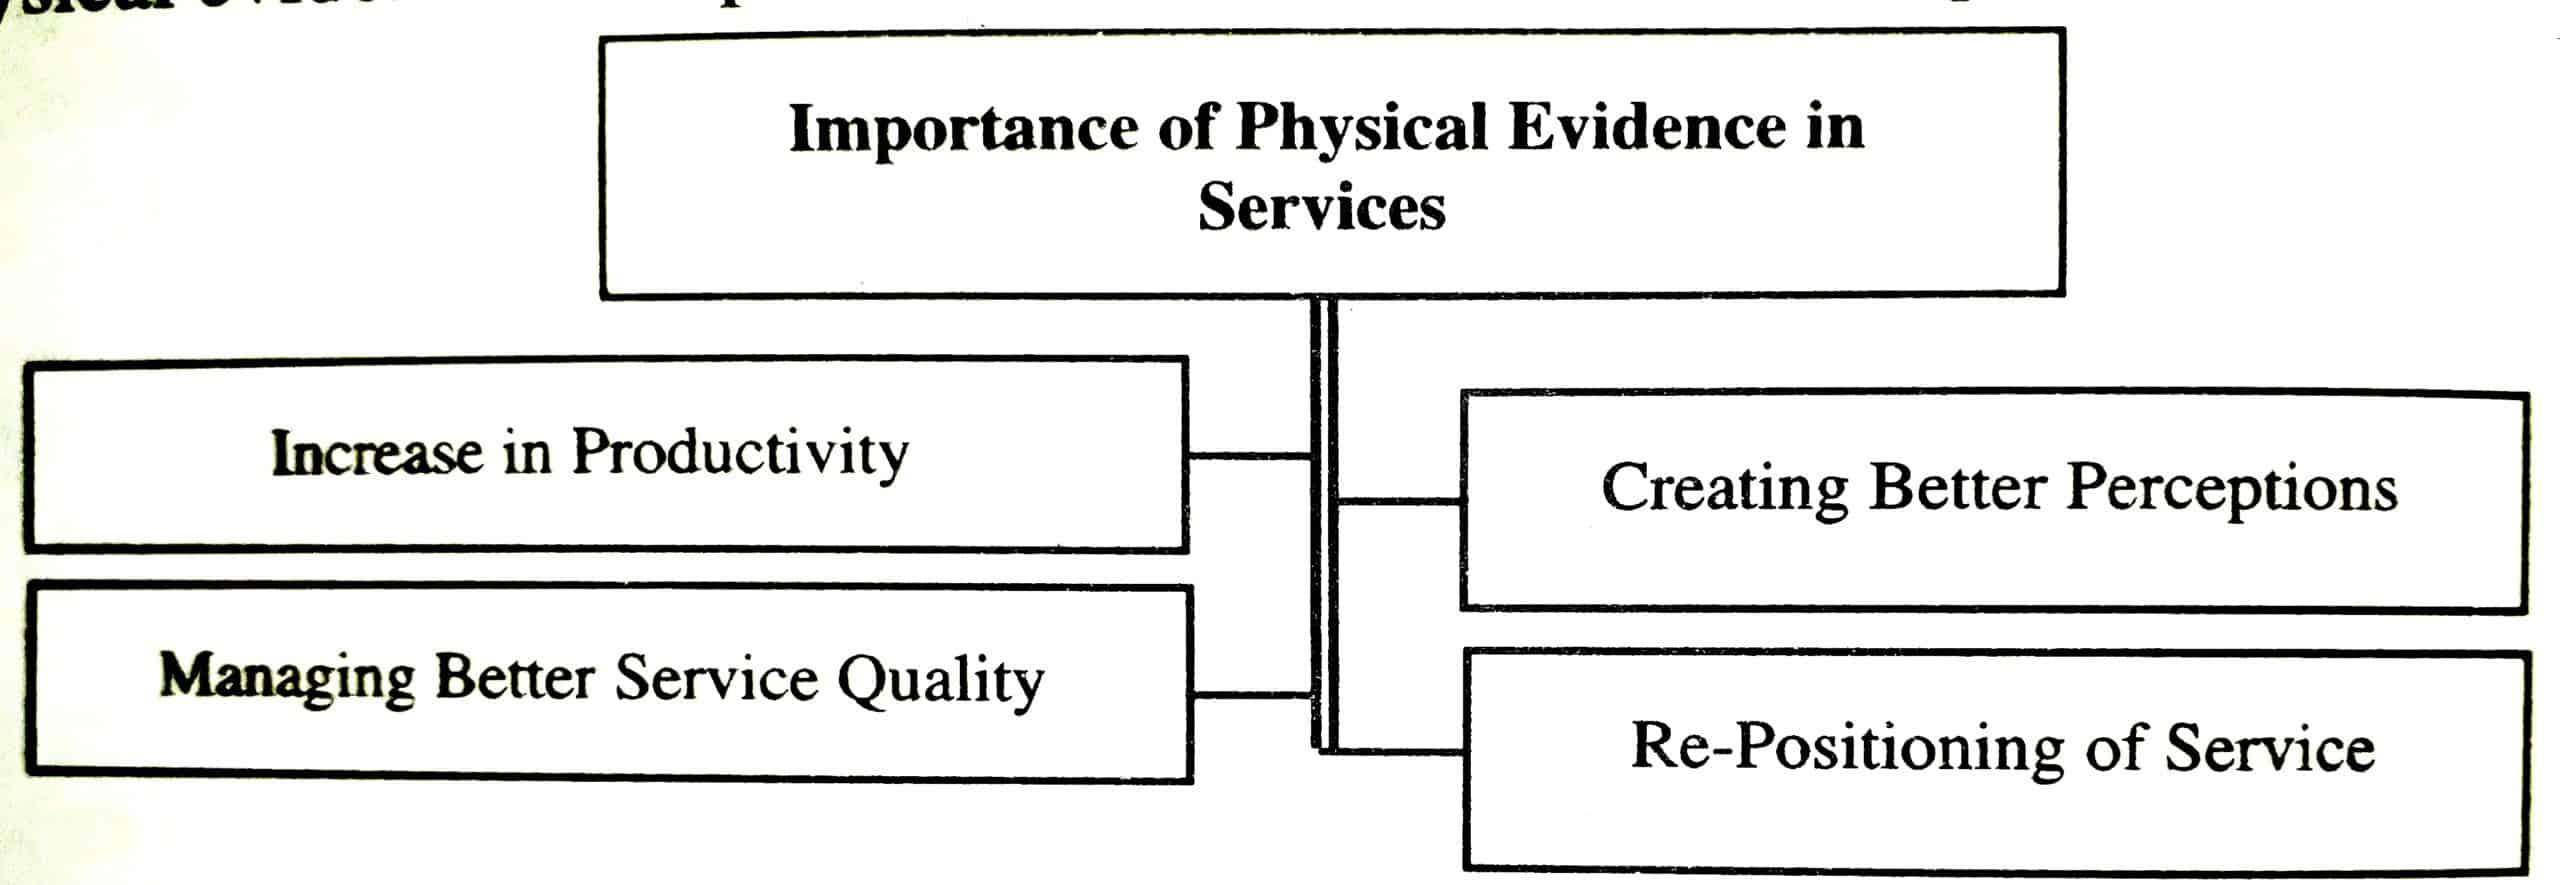 Importance of Physical Evidence in Services